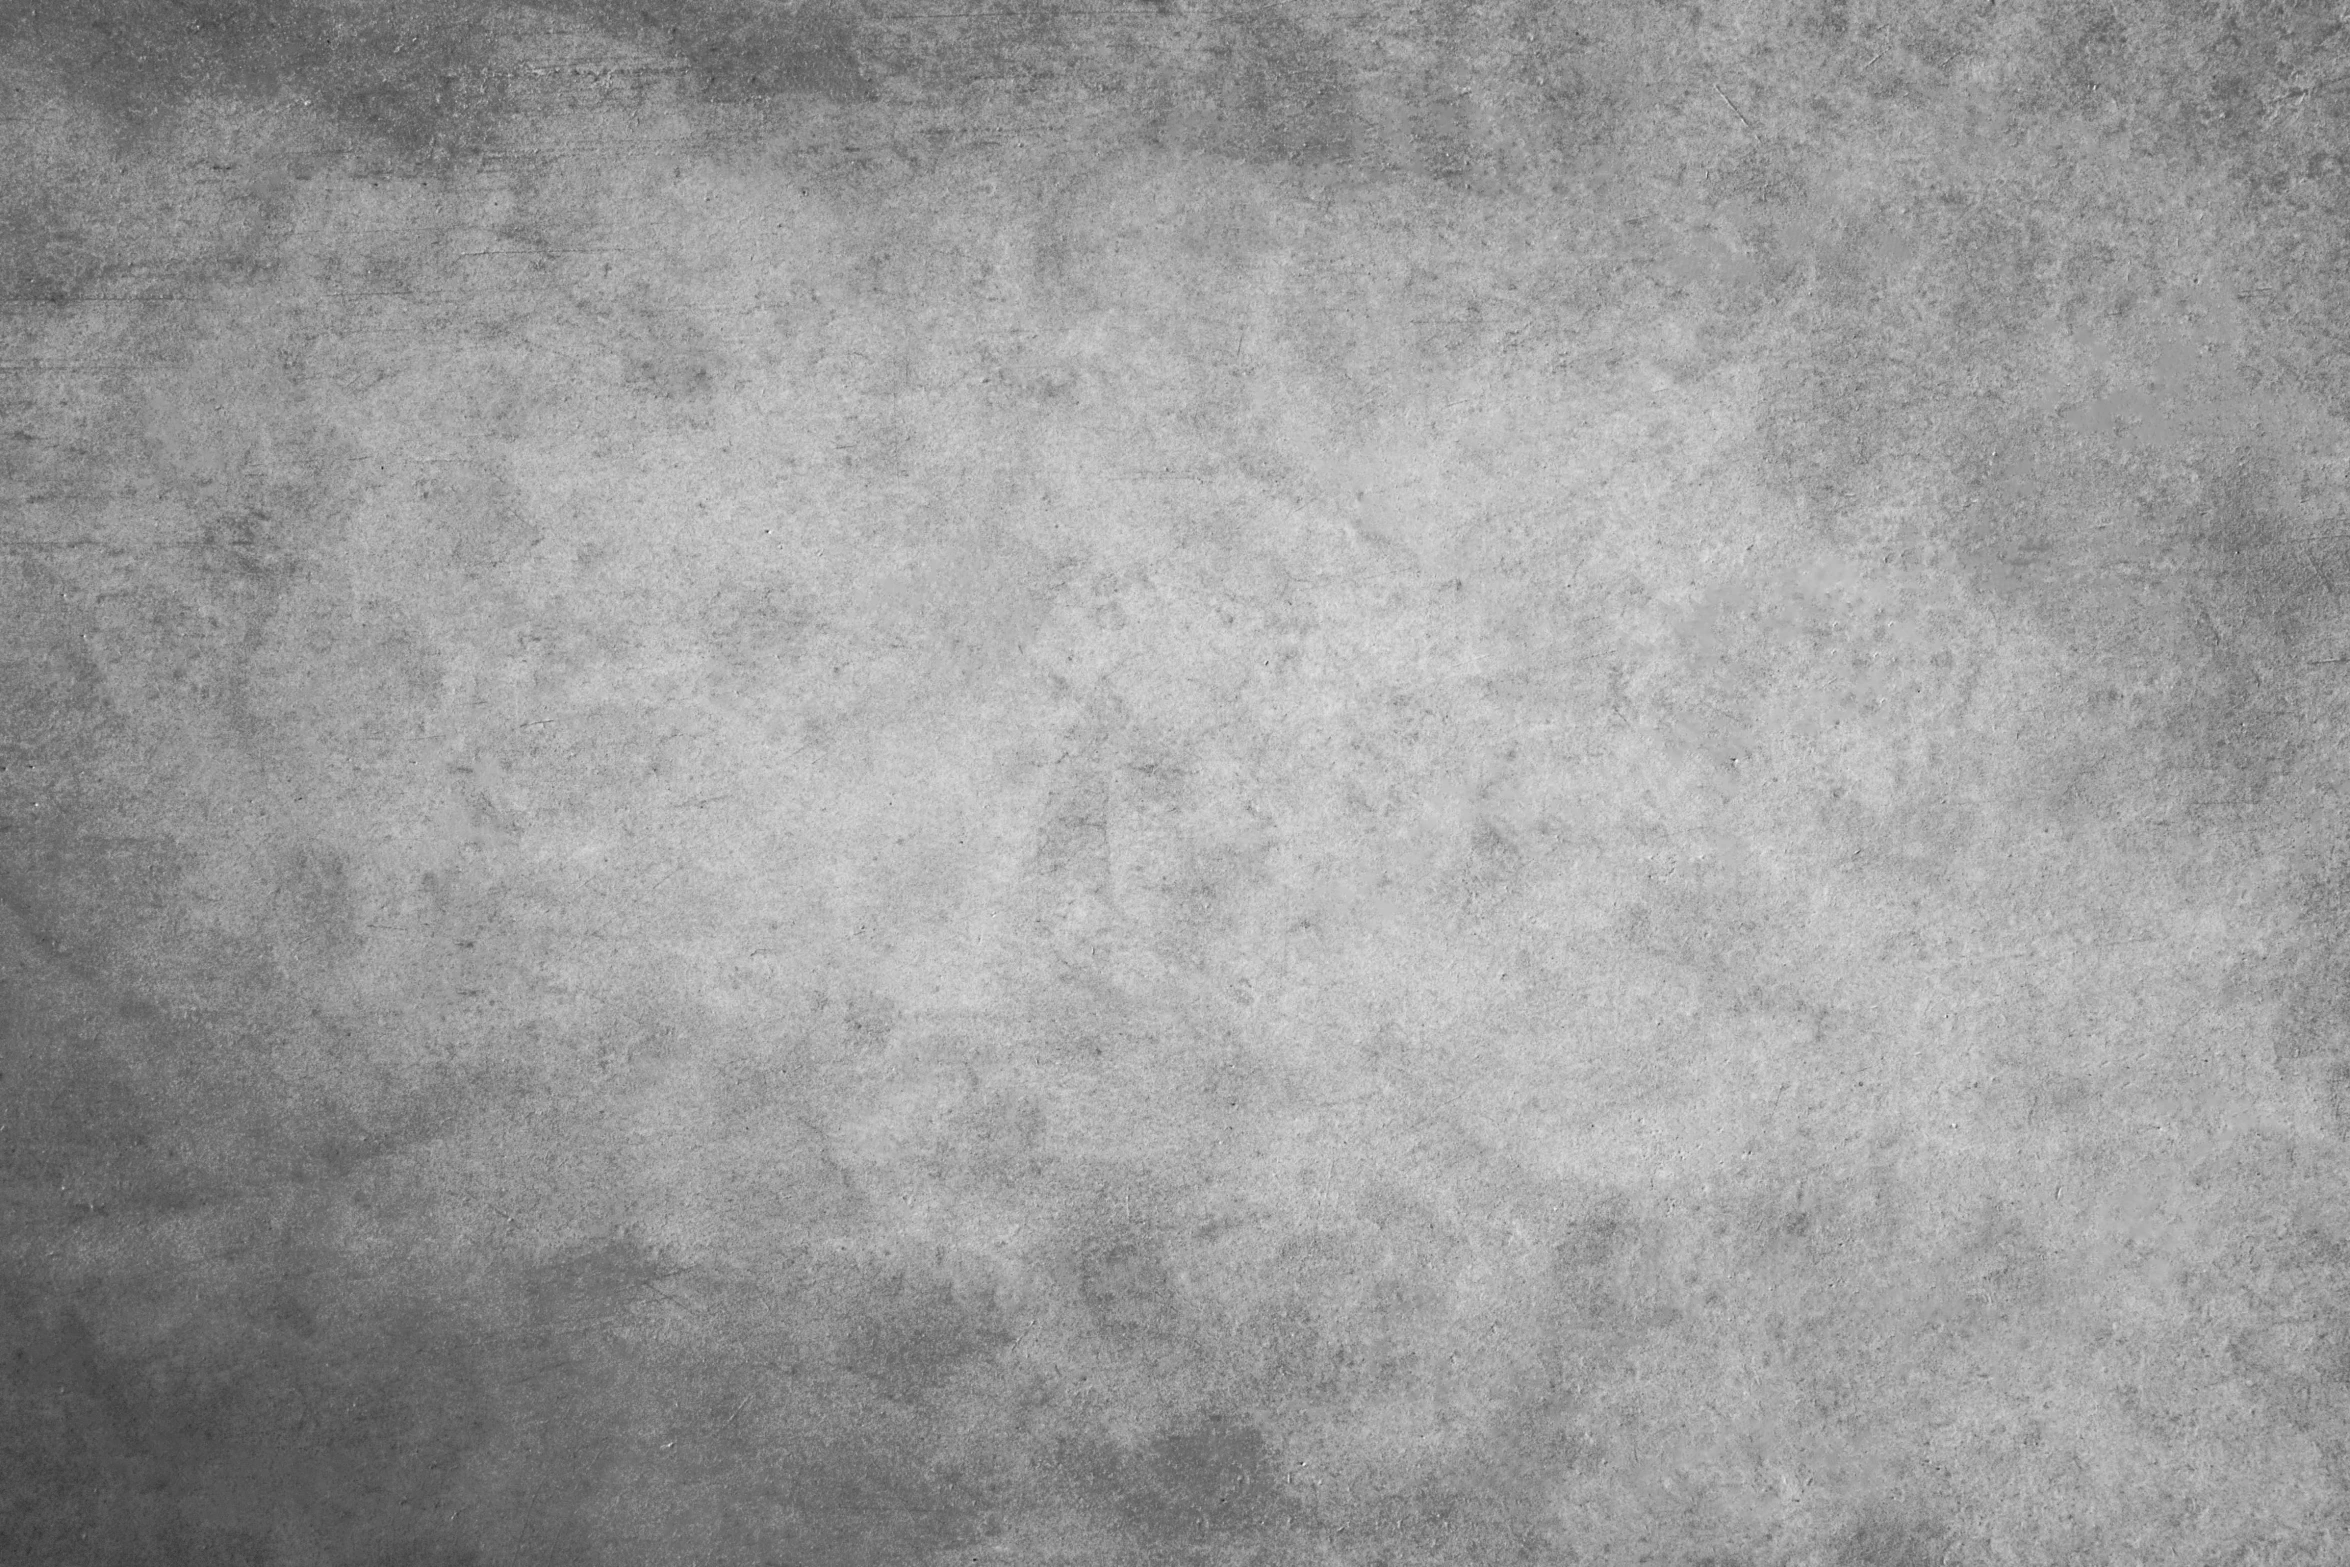 a black and white po of an abstract texture